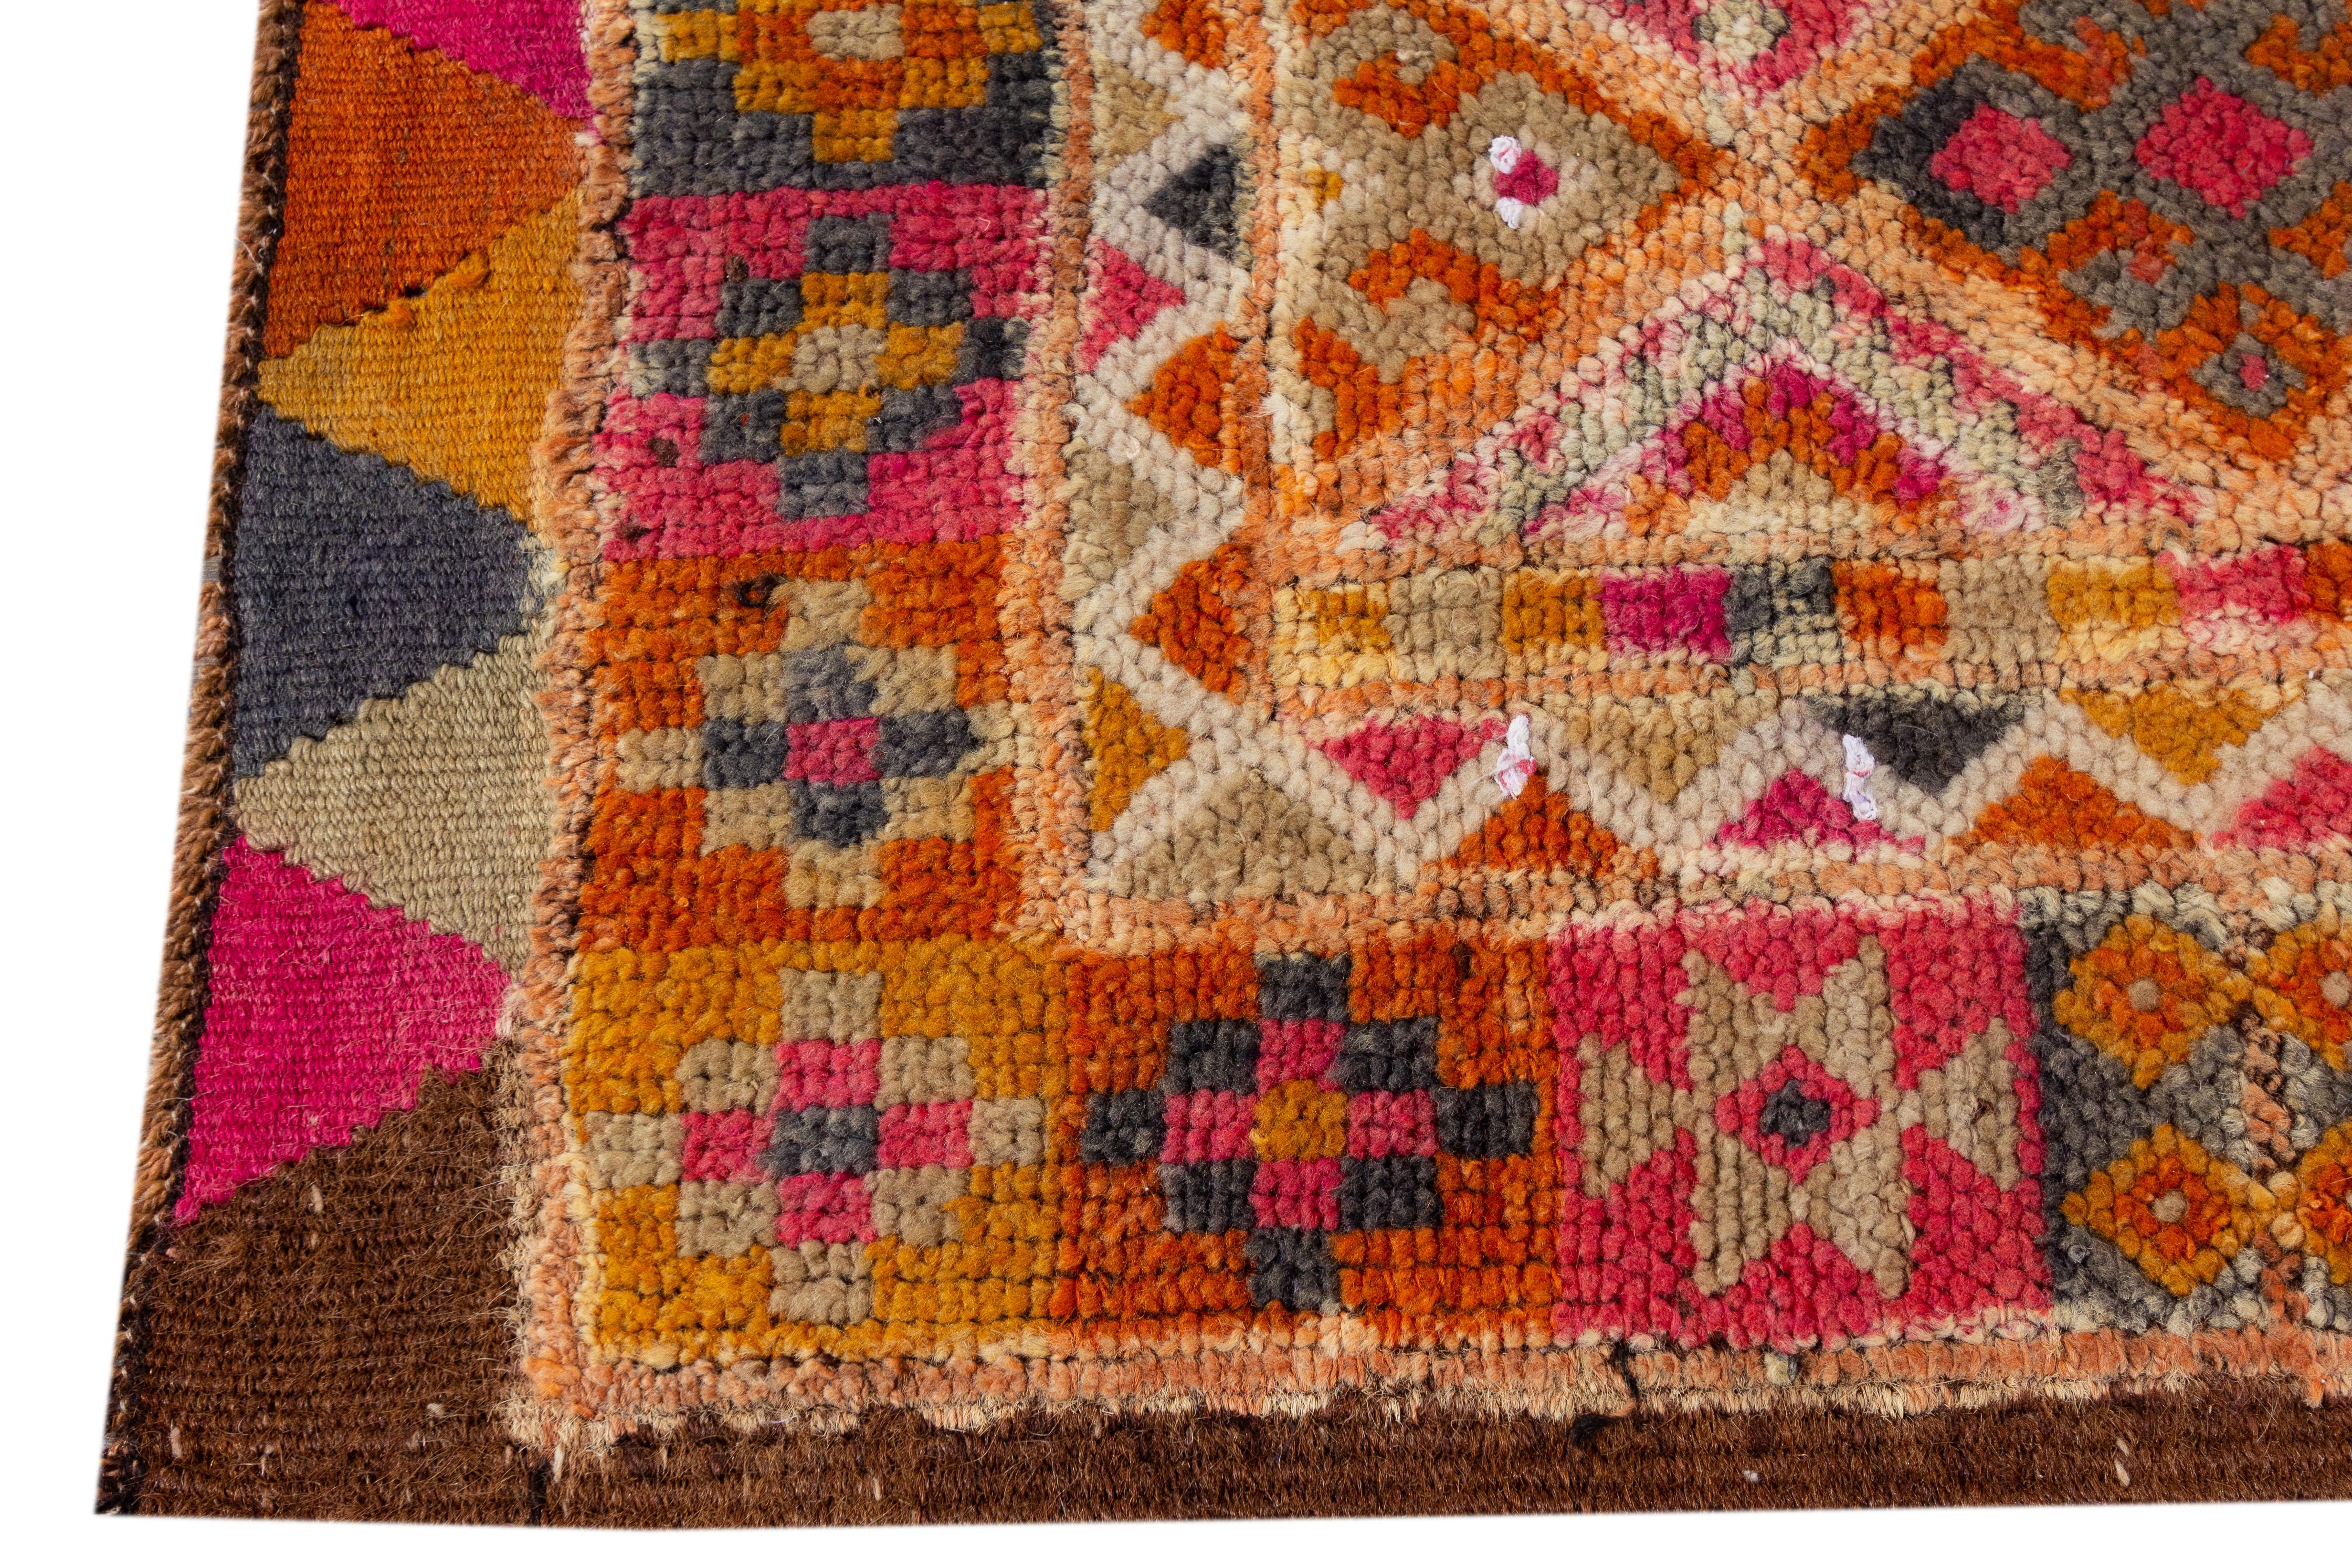 Vintage Turkish Anatolian Runner Rug In Good Condition For Sale In Norwalk, CT